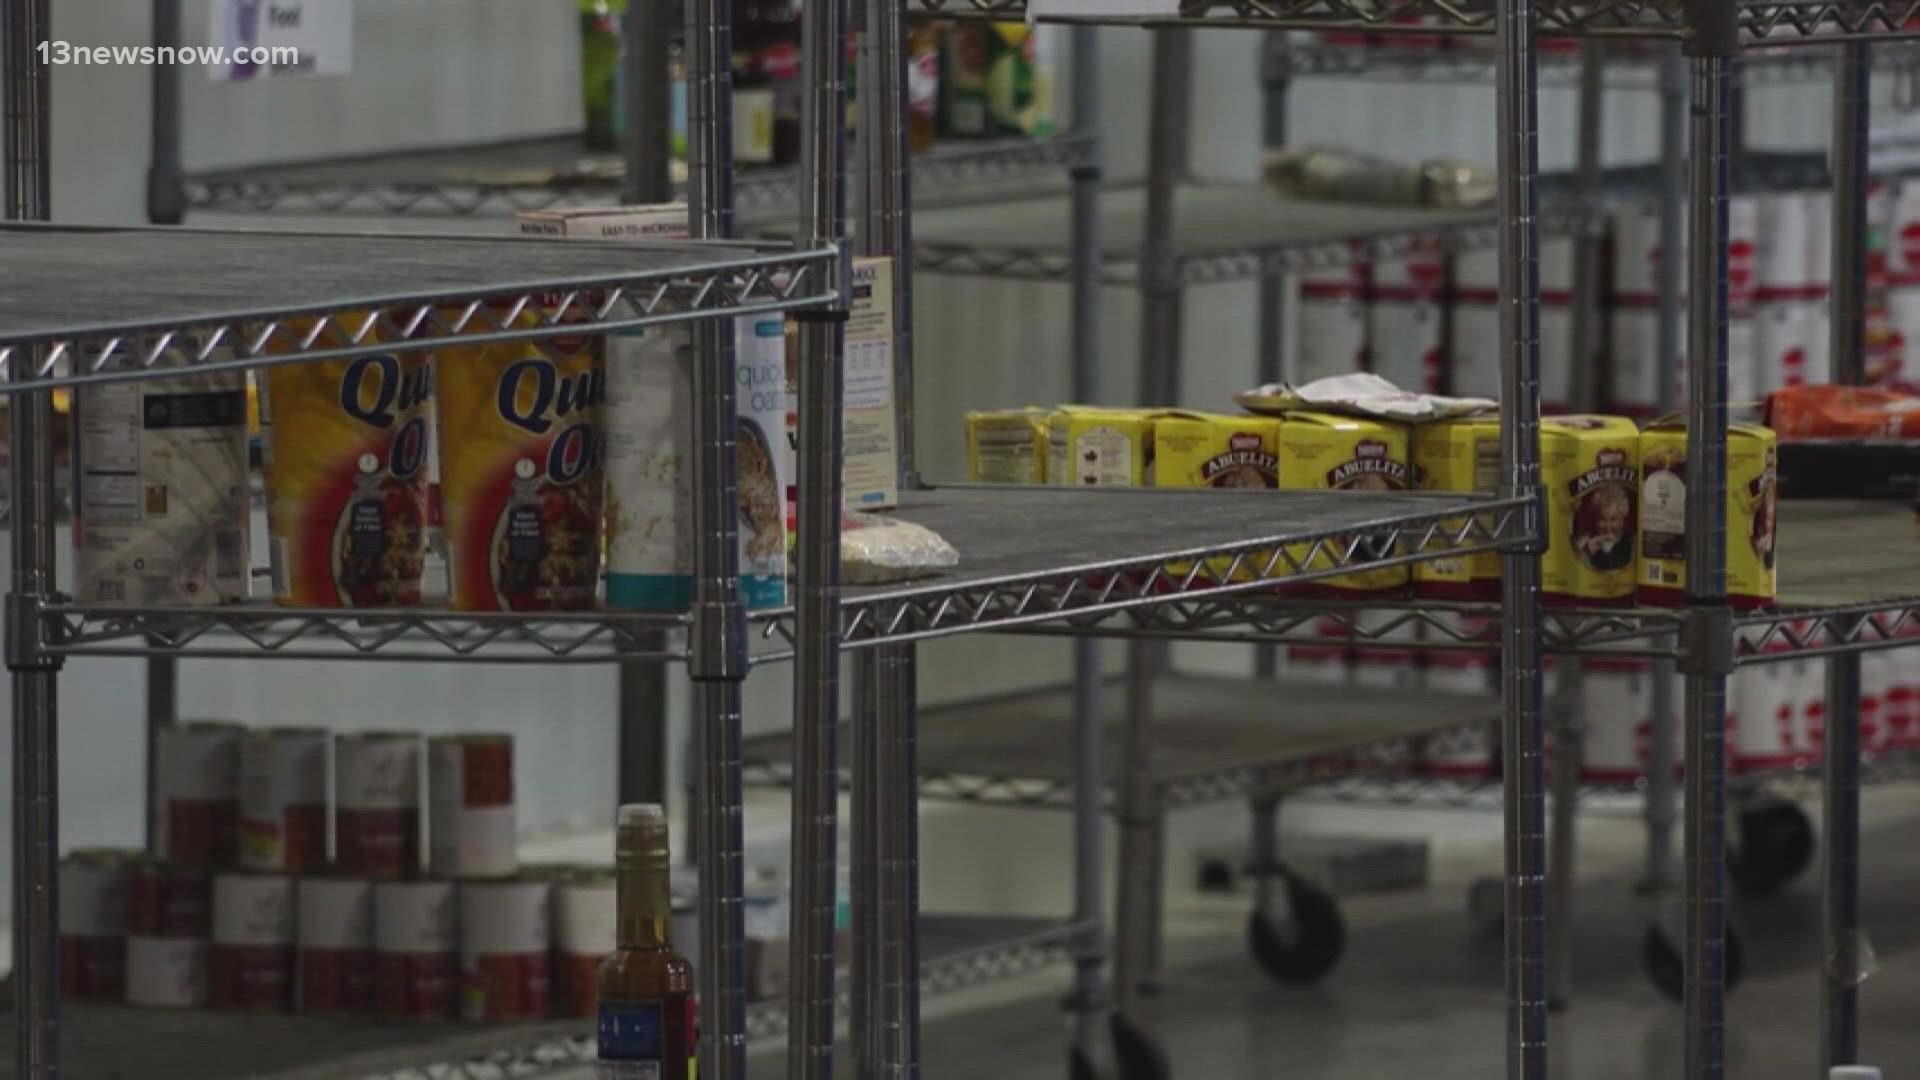 A year ago, one Norfolk foodbank said it spent about $1 million buying food to stock up. This year they’re looking at $5 million.